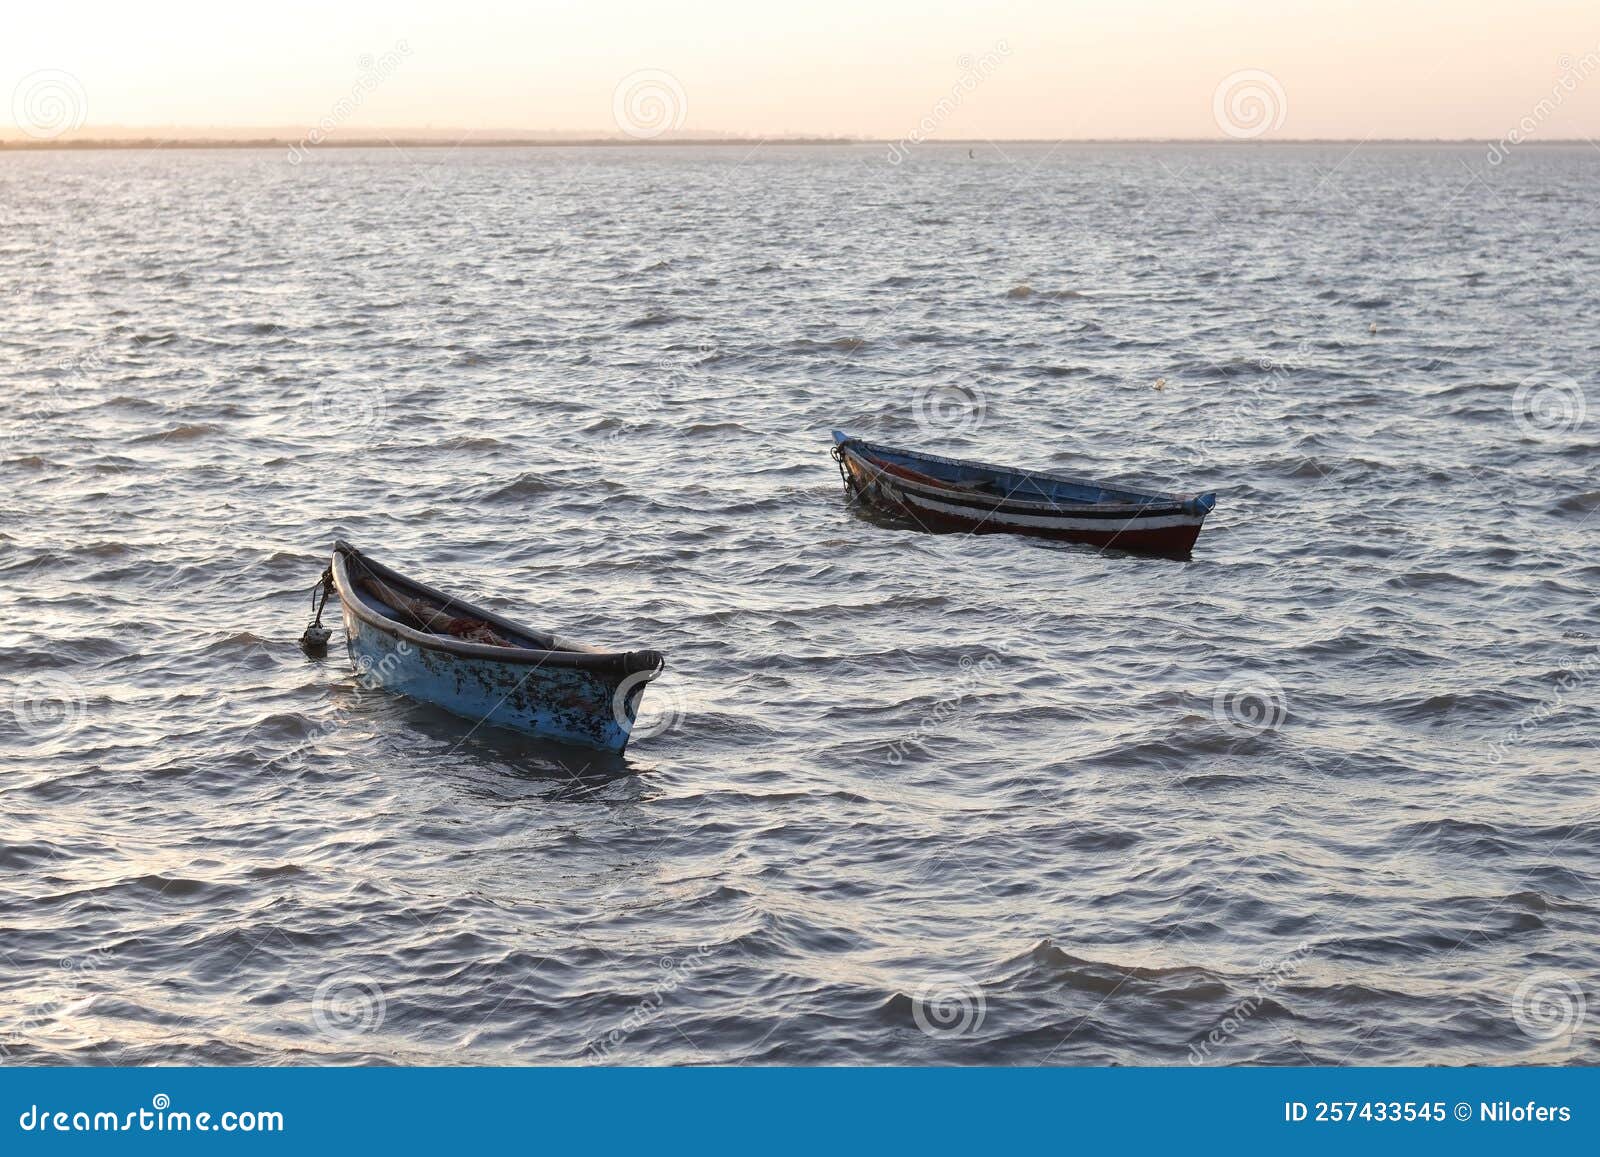 Beautiful Landscape of Fishing Boats on the Sea. Two Boats and